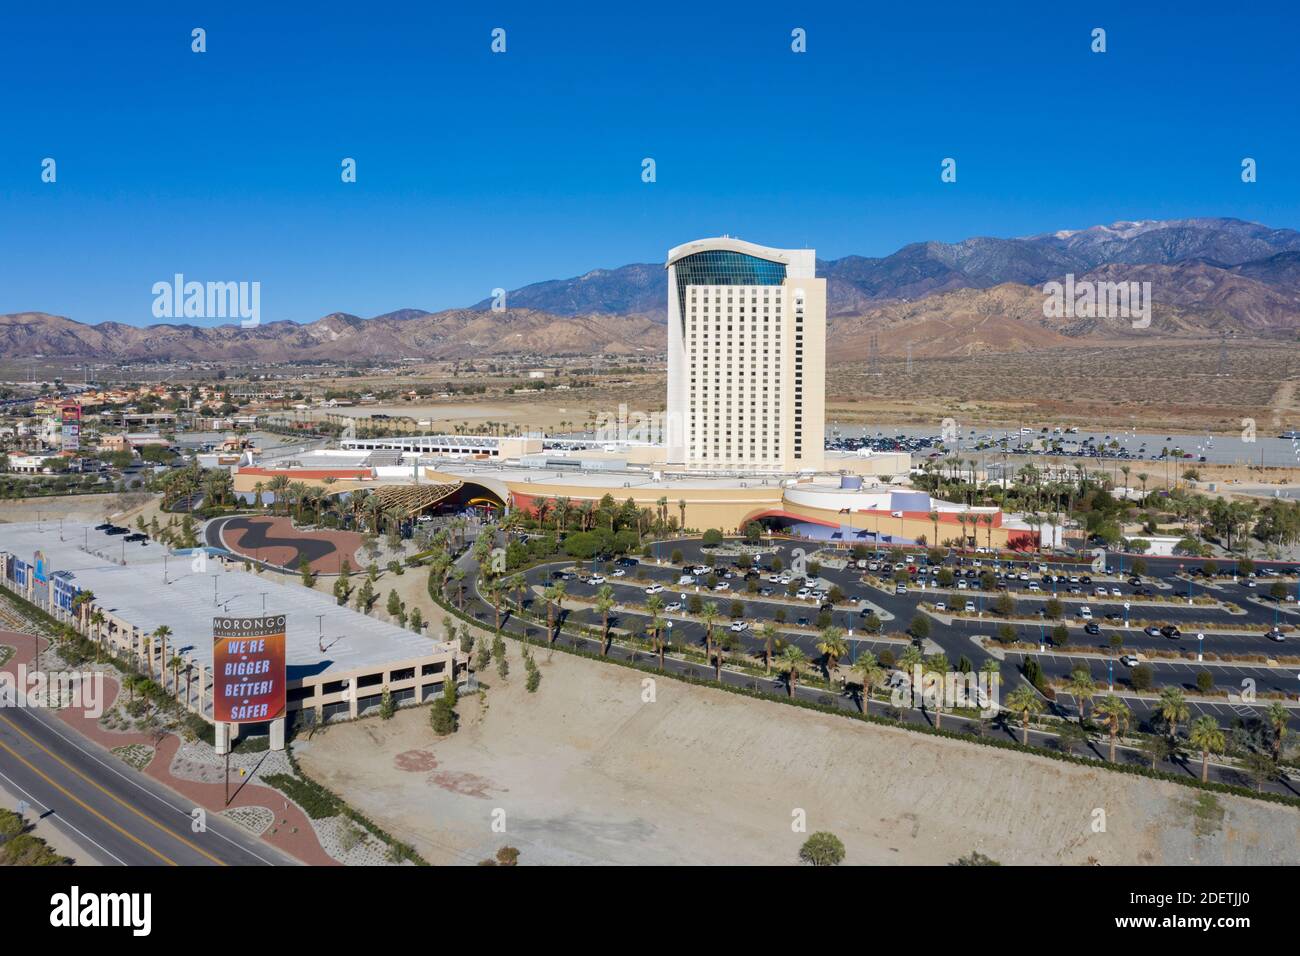 Aerial view of the Morongo Casino and tower in Cabazon, California Stock Photo